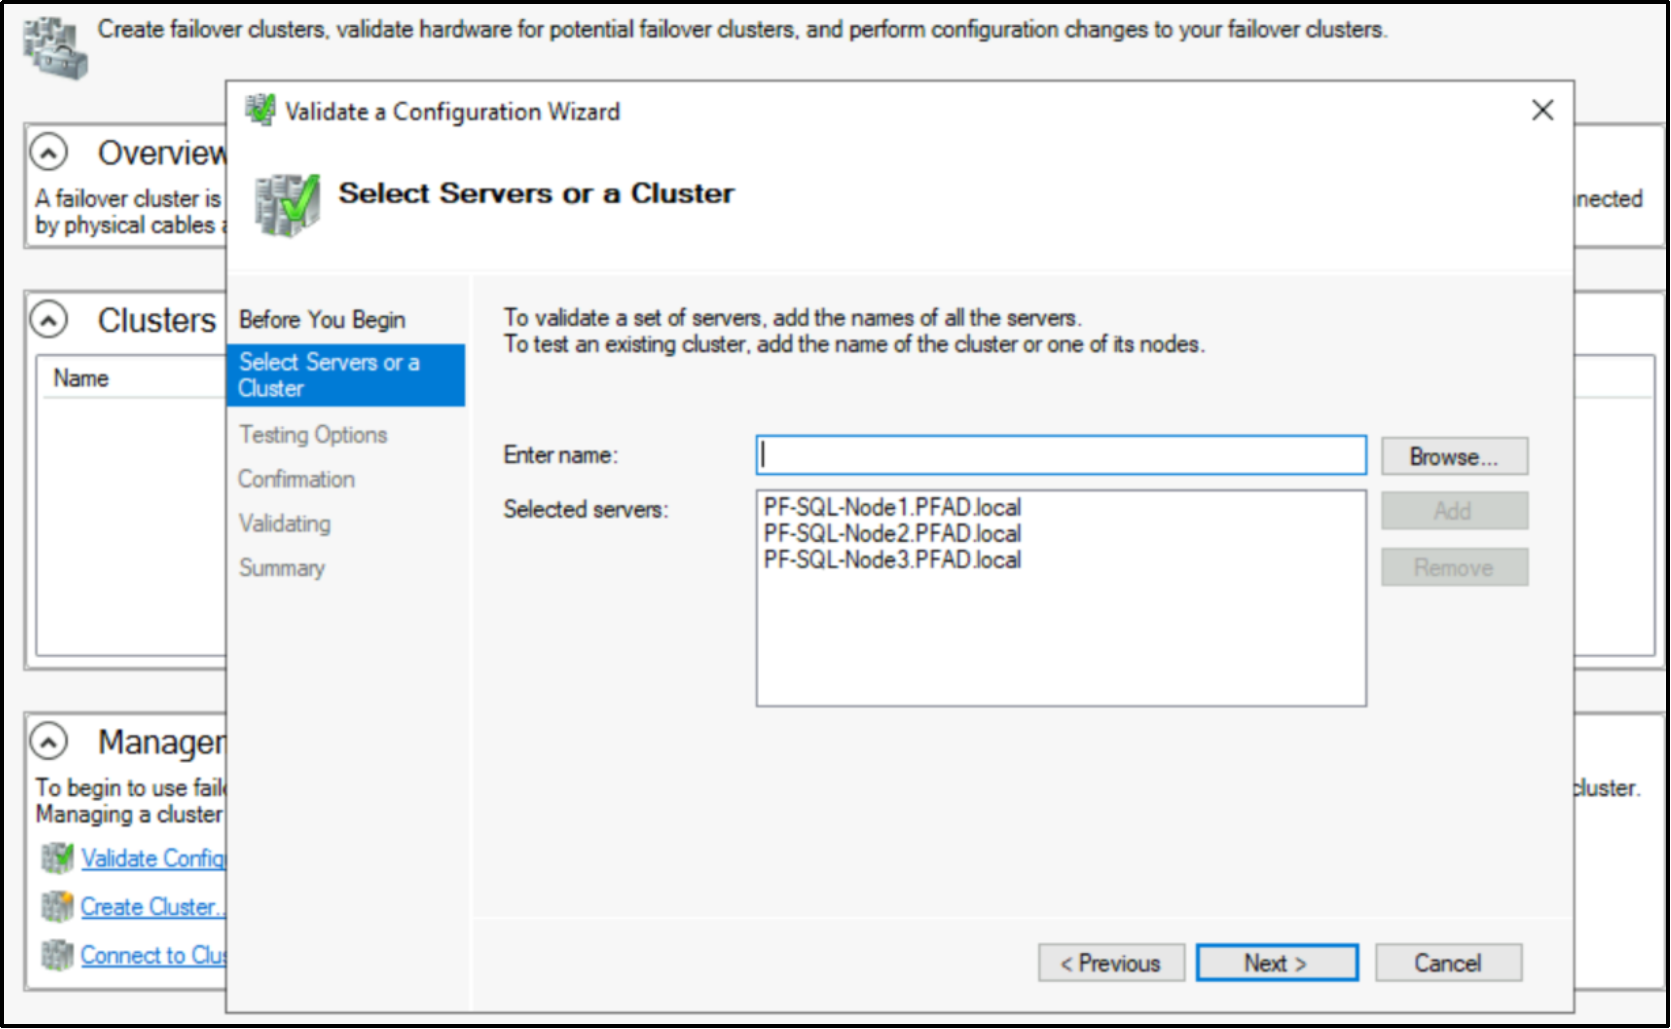 This figure shows how to select servers or a cluster.